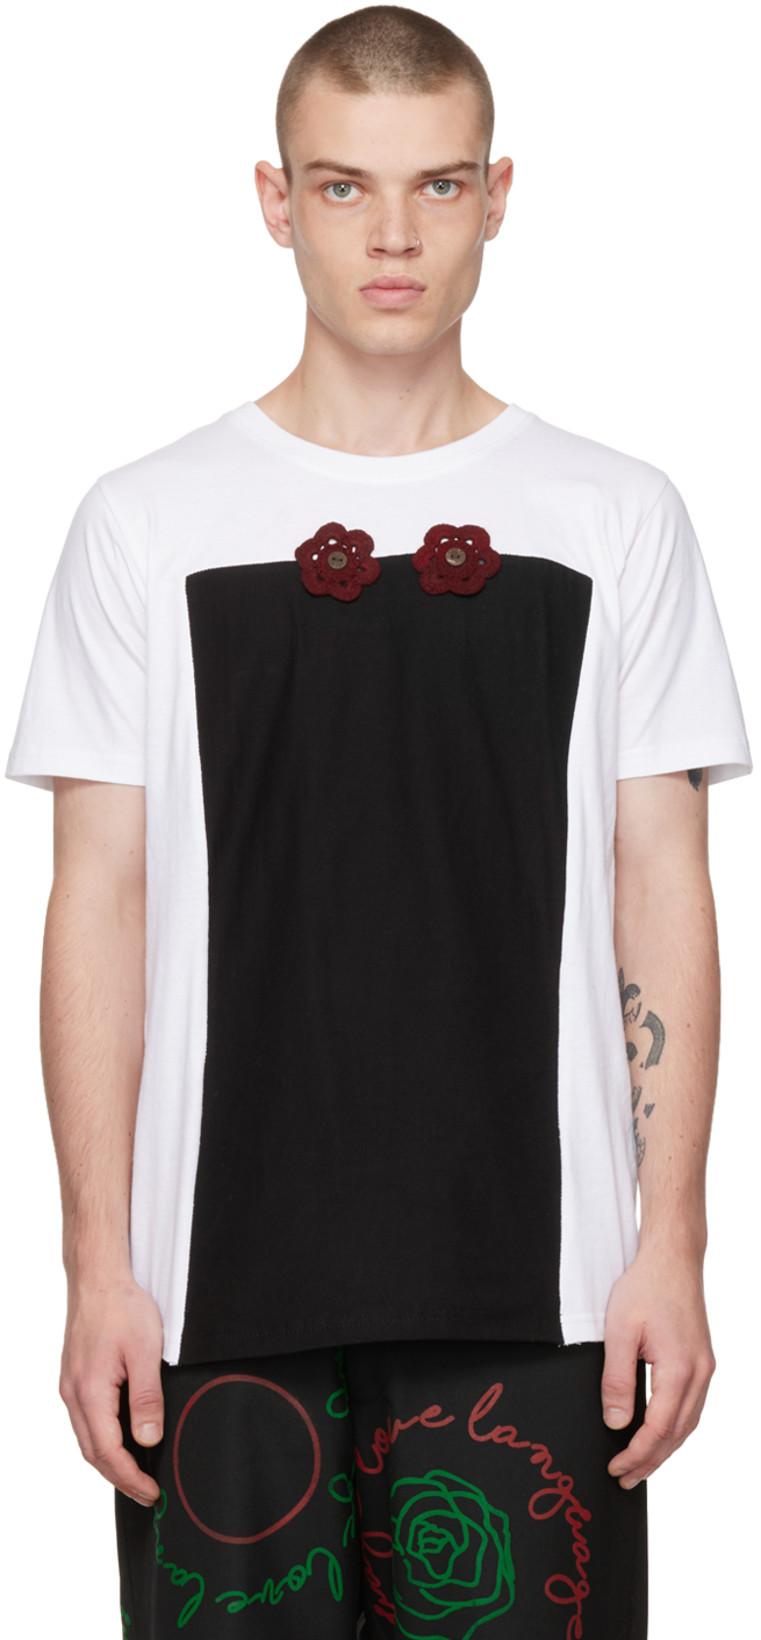 Black & White Embroidered T-Shirt by BLOKE